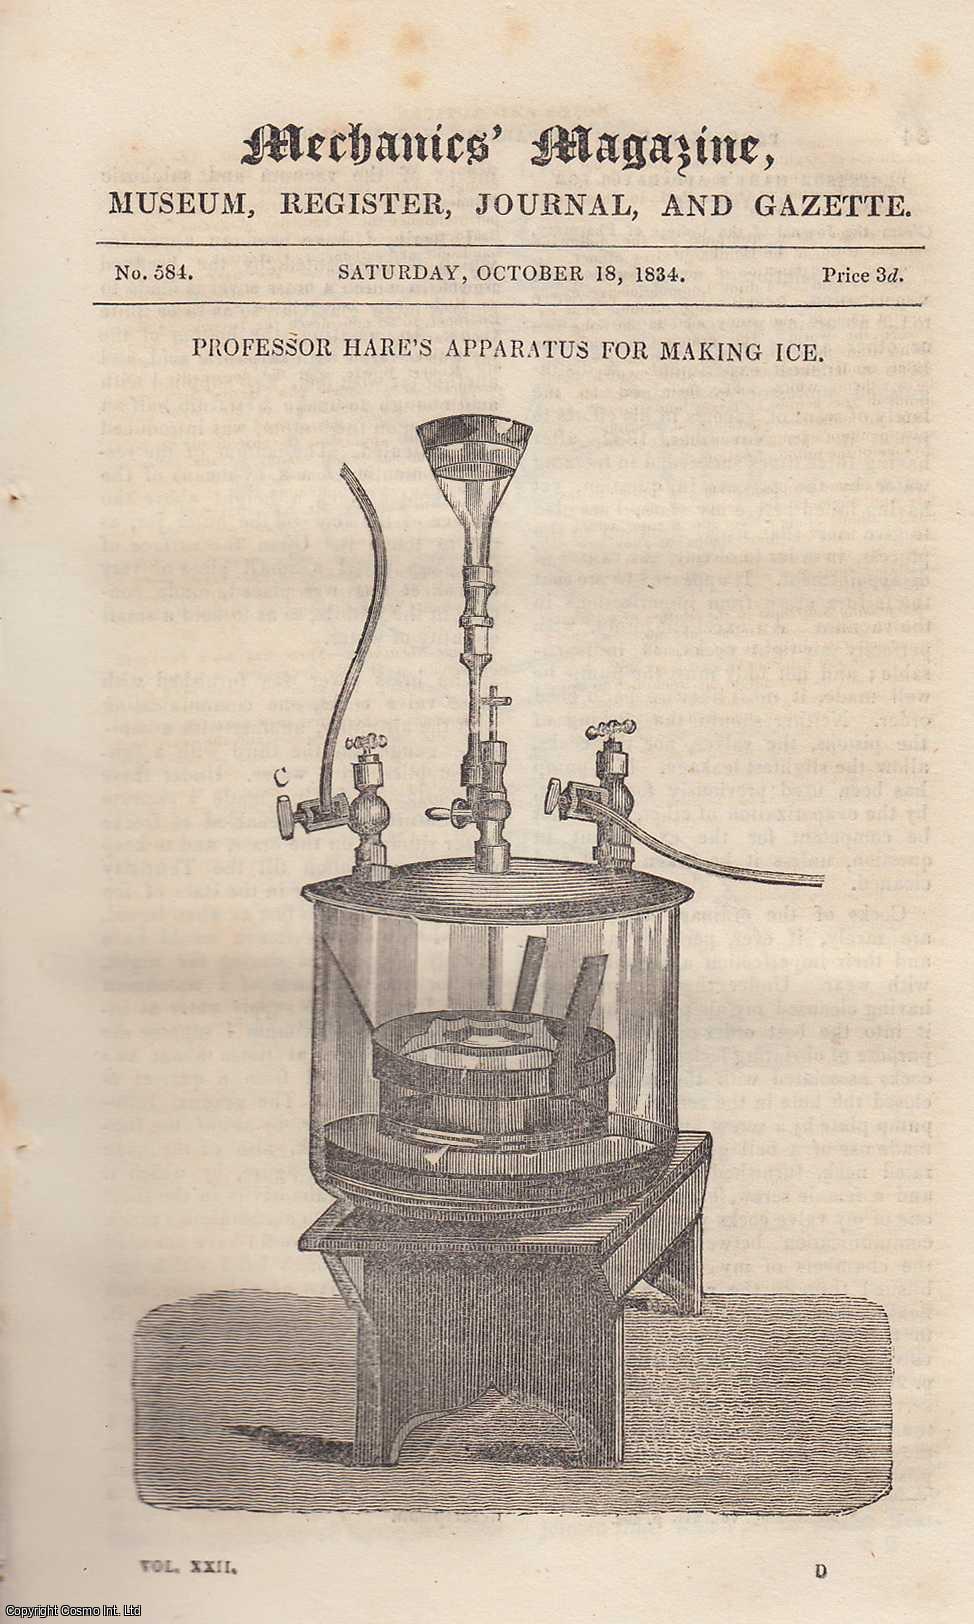 --- - Professor Hare's Apparatus For Making Ice; Shifting Paddle-Wheel; Barton's Improved Metallic Pistons; The Earl of Dundonald's New Discovery; The Dublin & Kingstown Railway, etc. Mechanics Magazine, Museum, Register, Journal and Gazette. Issue No. 584. A complete rare weekly issue of the Mechanics' Magazine, 1834.